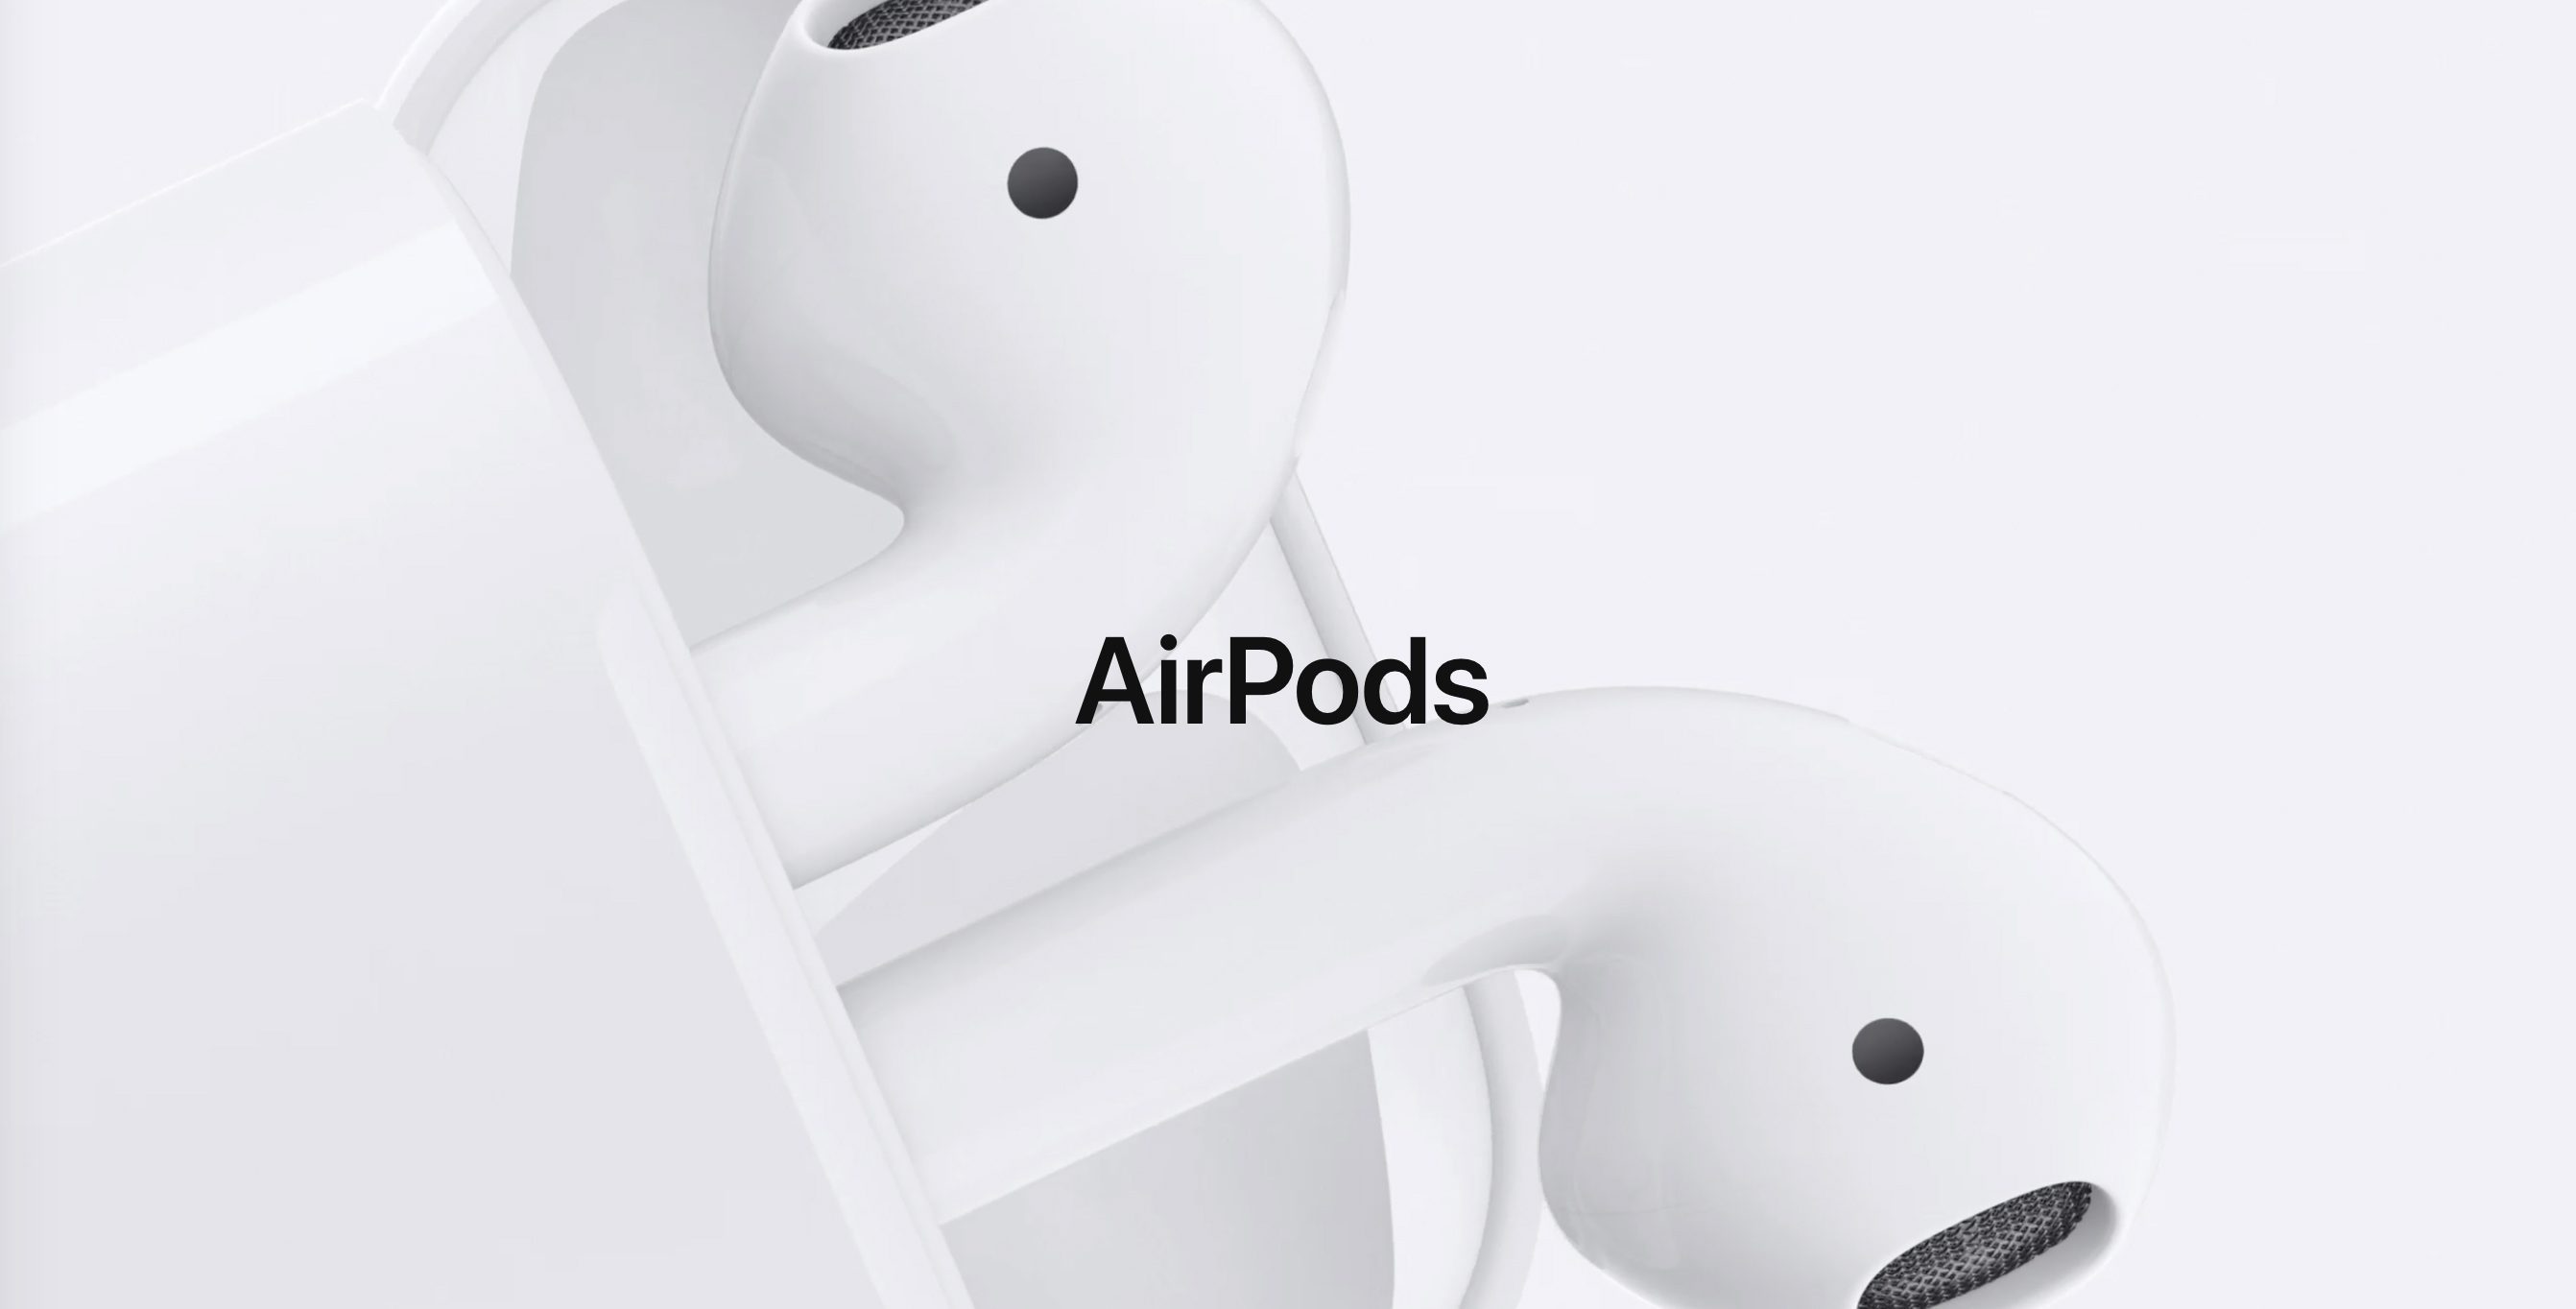 Apple AirPods will See Upgrade in 2019, All-new Design by 2020, Kuo Predicts